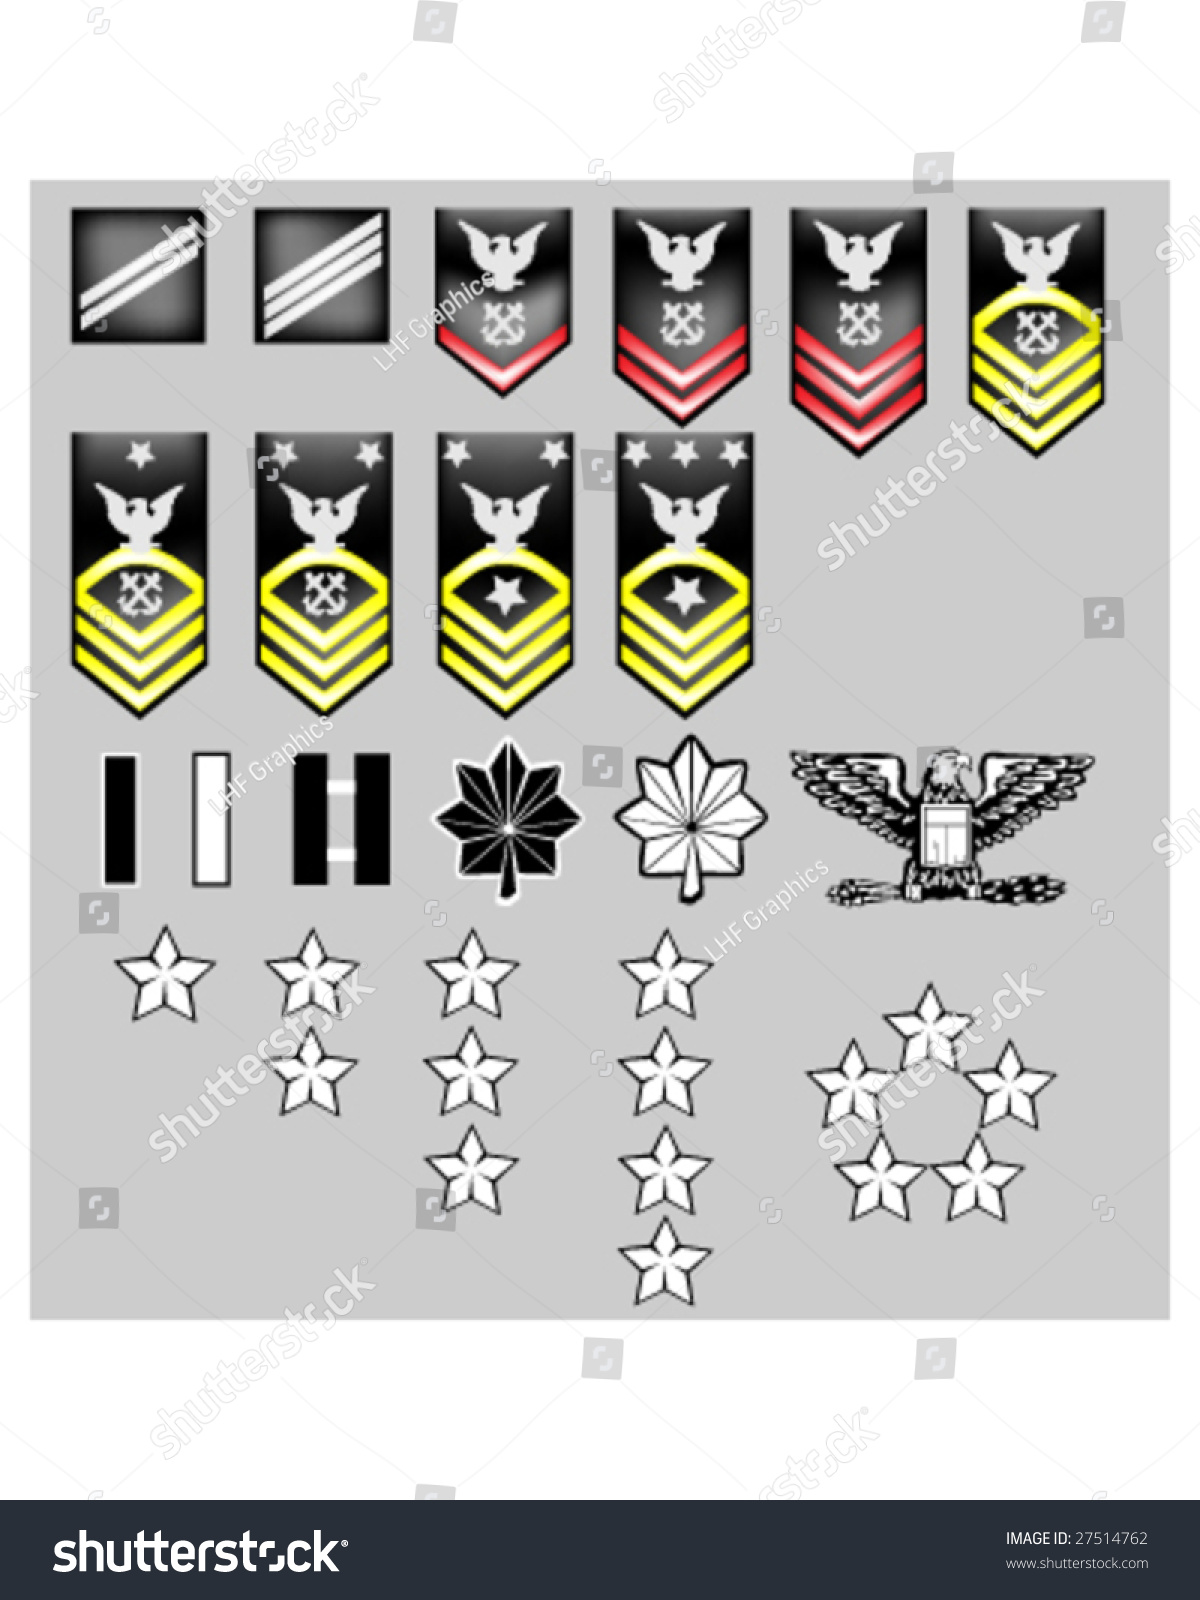 Us Navy Rank Insignia For Officers And Enlisted In Vector Format With ...